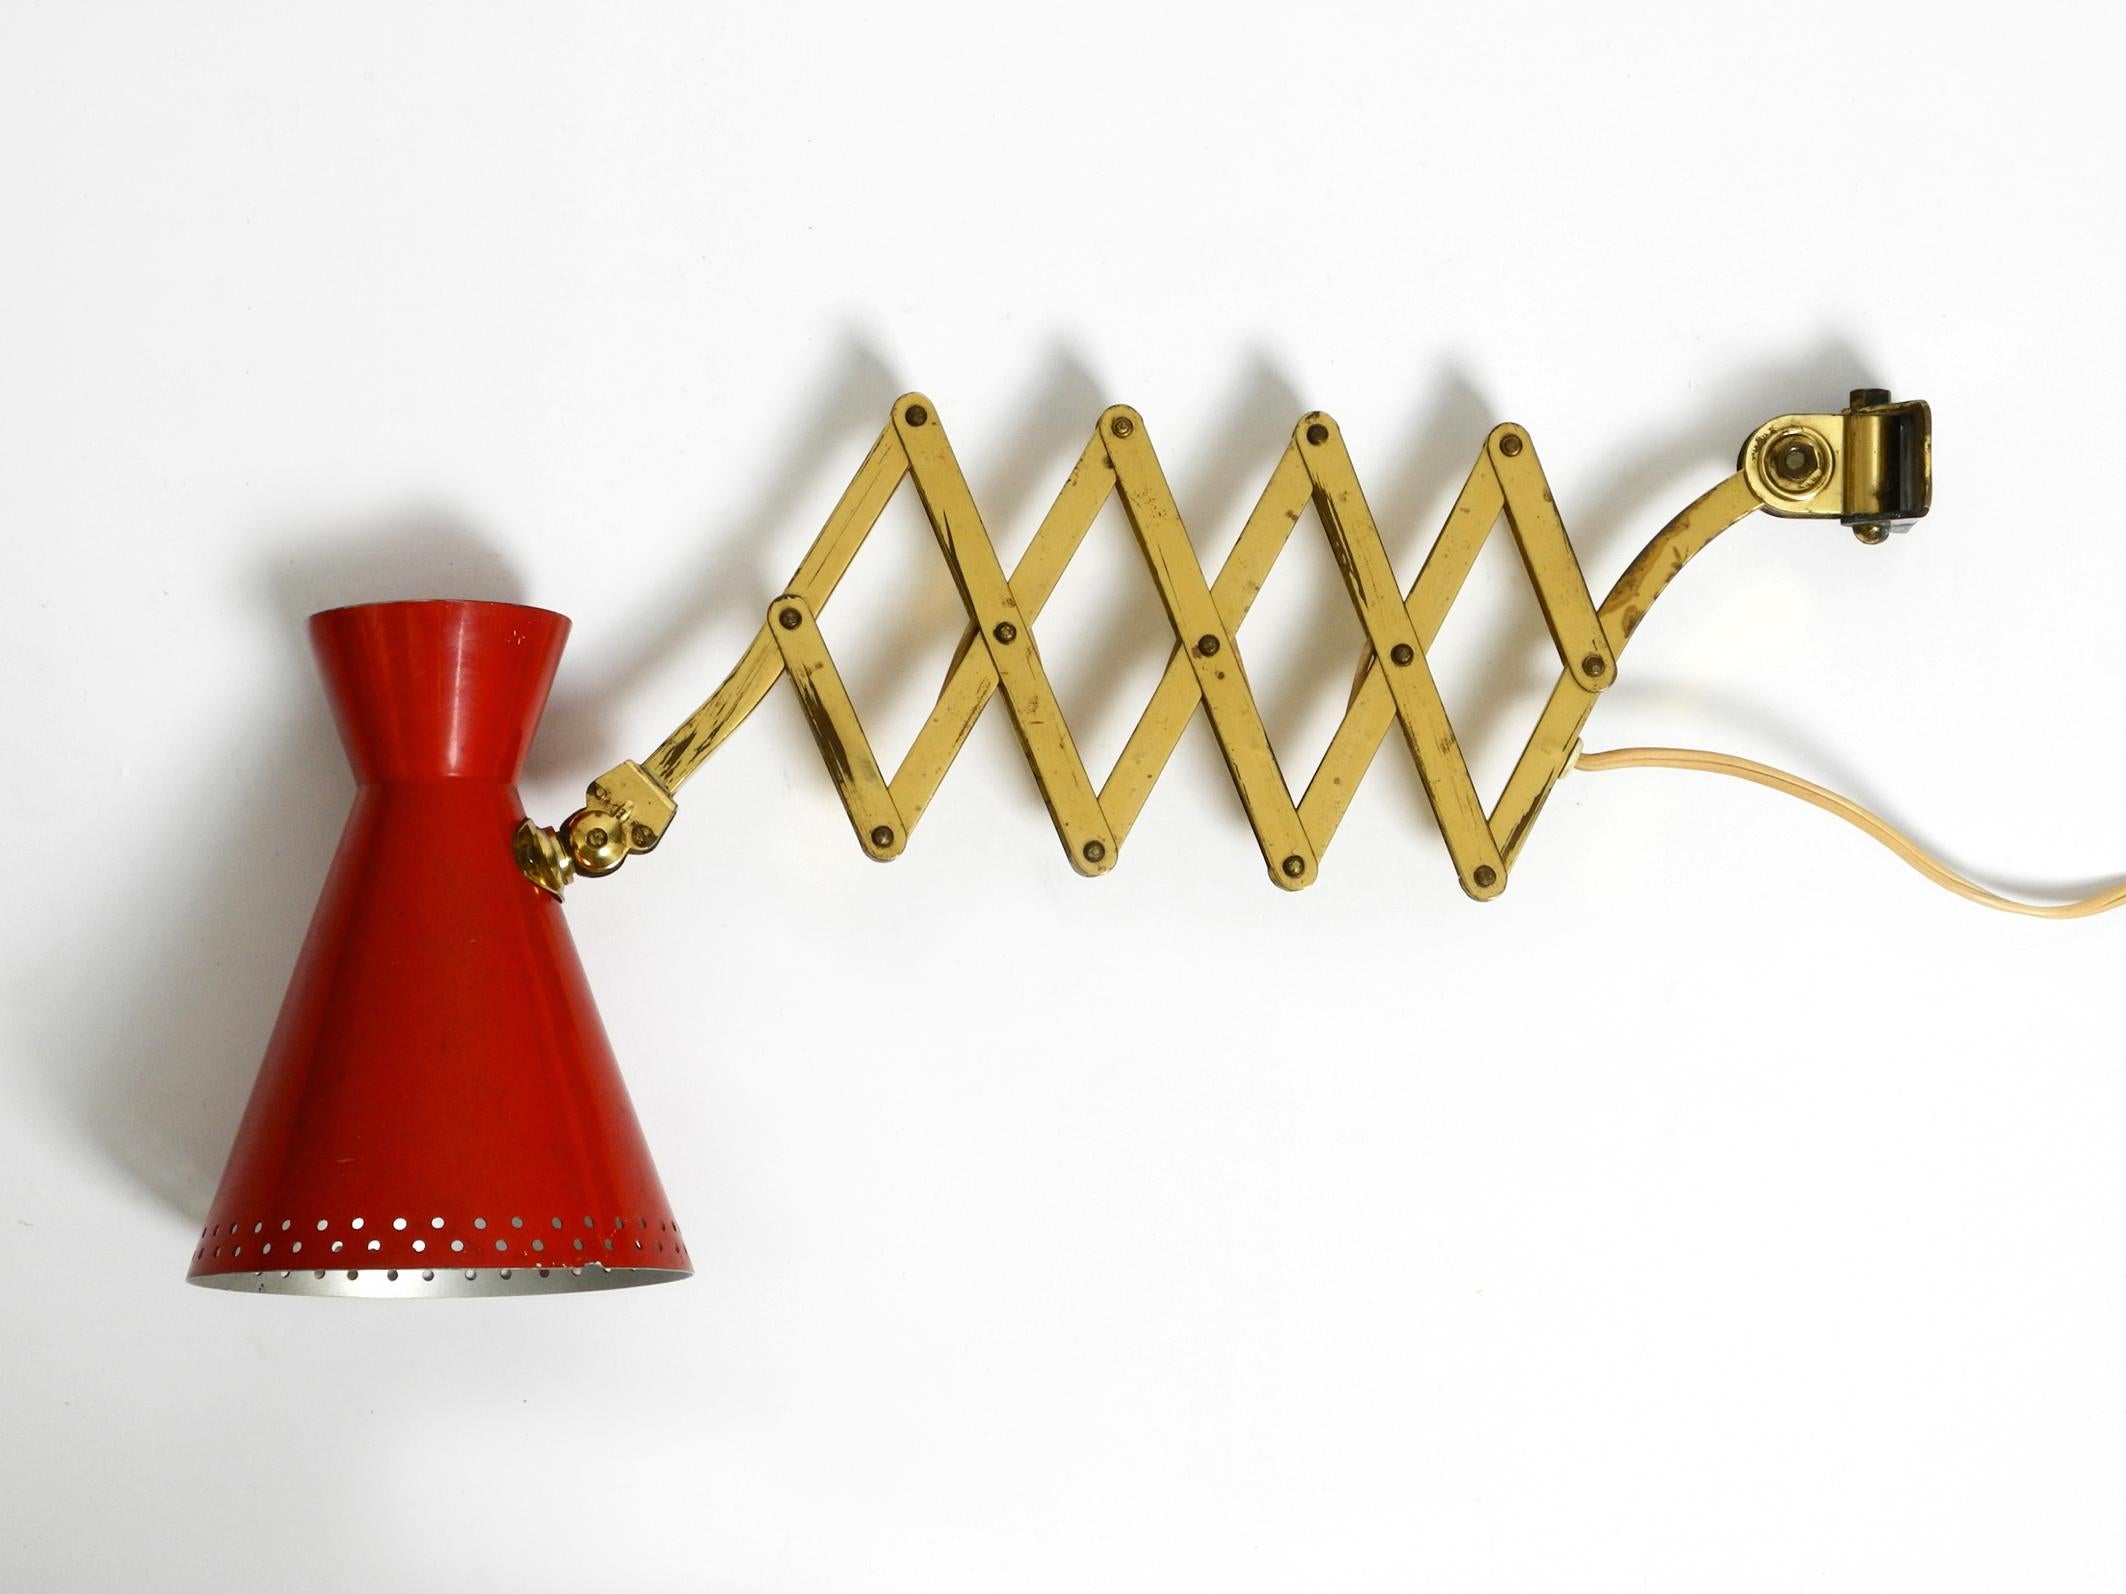 Beautiful original Mid Century brass extendable scissor wall lamp with outside red painted diabolo shade.
Great quality 1950s design. Made in Germany.
The frame is made entirely of brass, the shade is made of aluminium.
The shade can be rotated